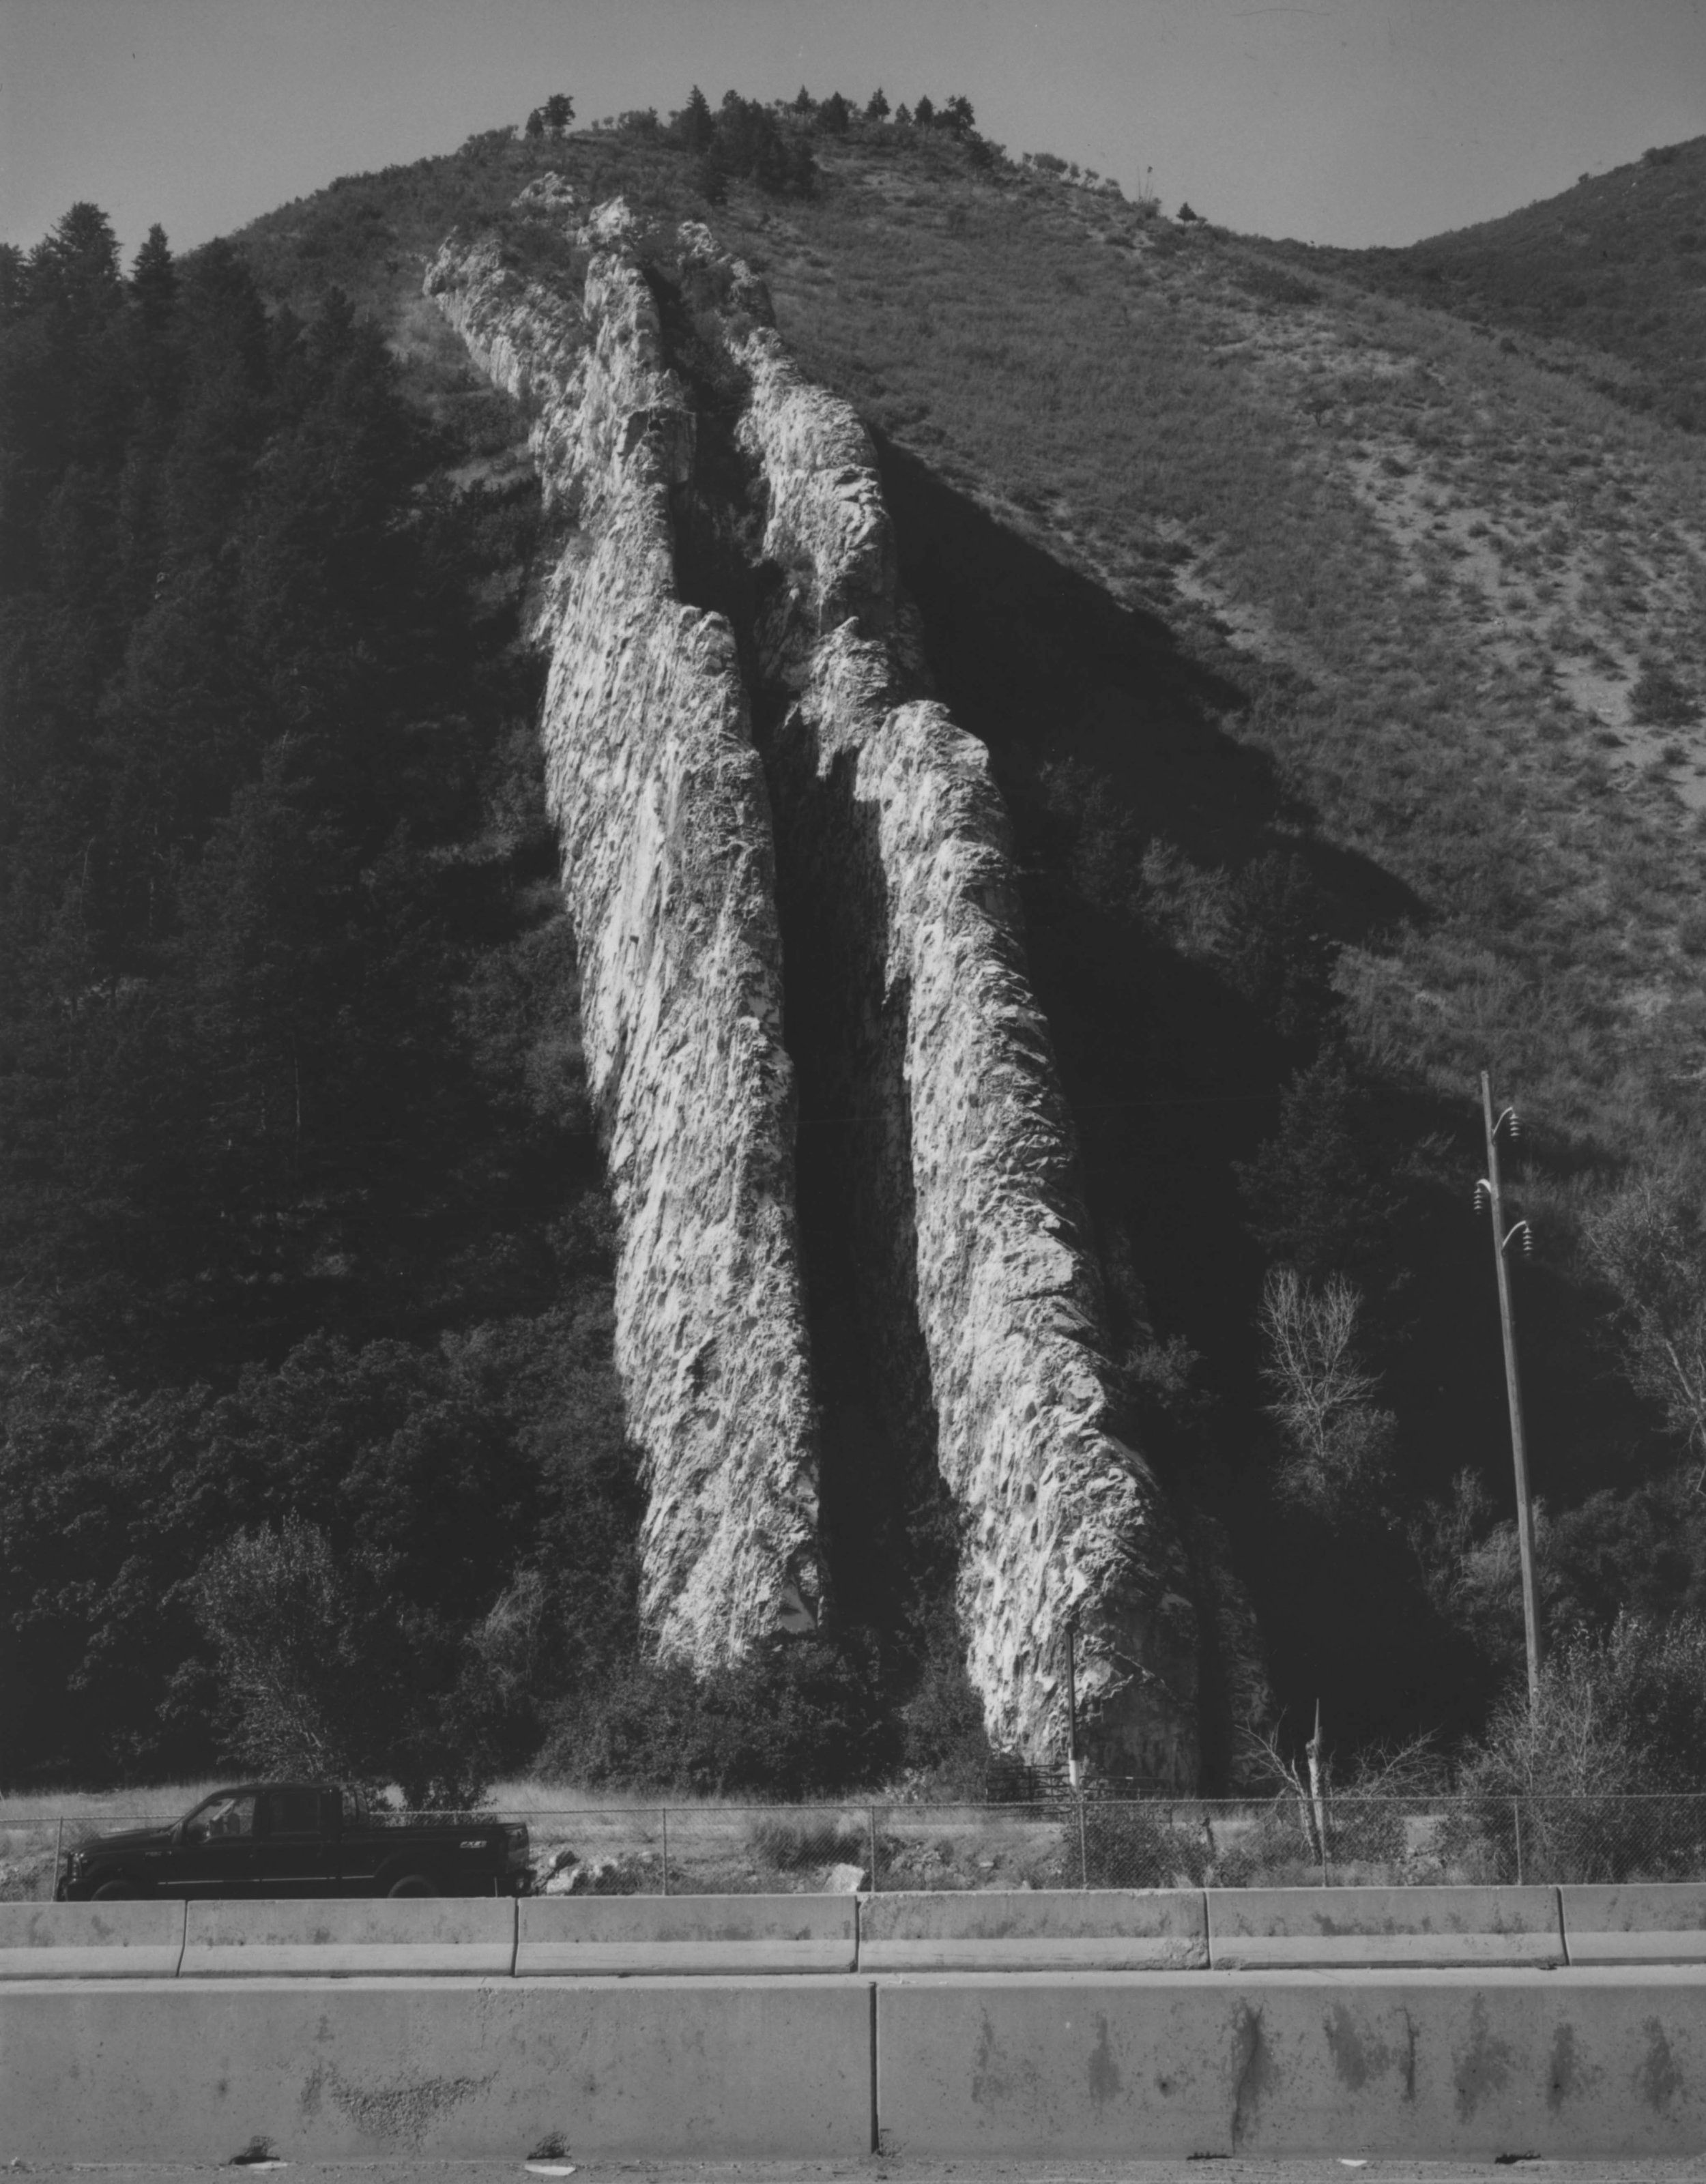   Devil’s Slide is a bizarre, giant-size limestone chute, located on the south side of Interstate- 84 in Weber Canyon, Utah.   This site is a tilted remnant of sediments deposited in a sea that occupied Utah’s   distant geologic past.  